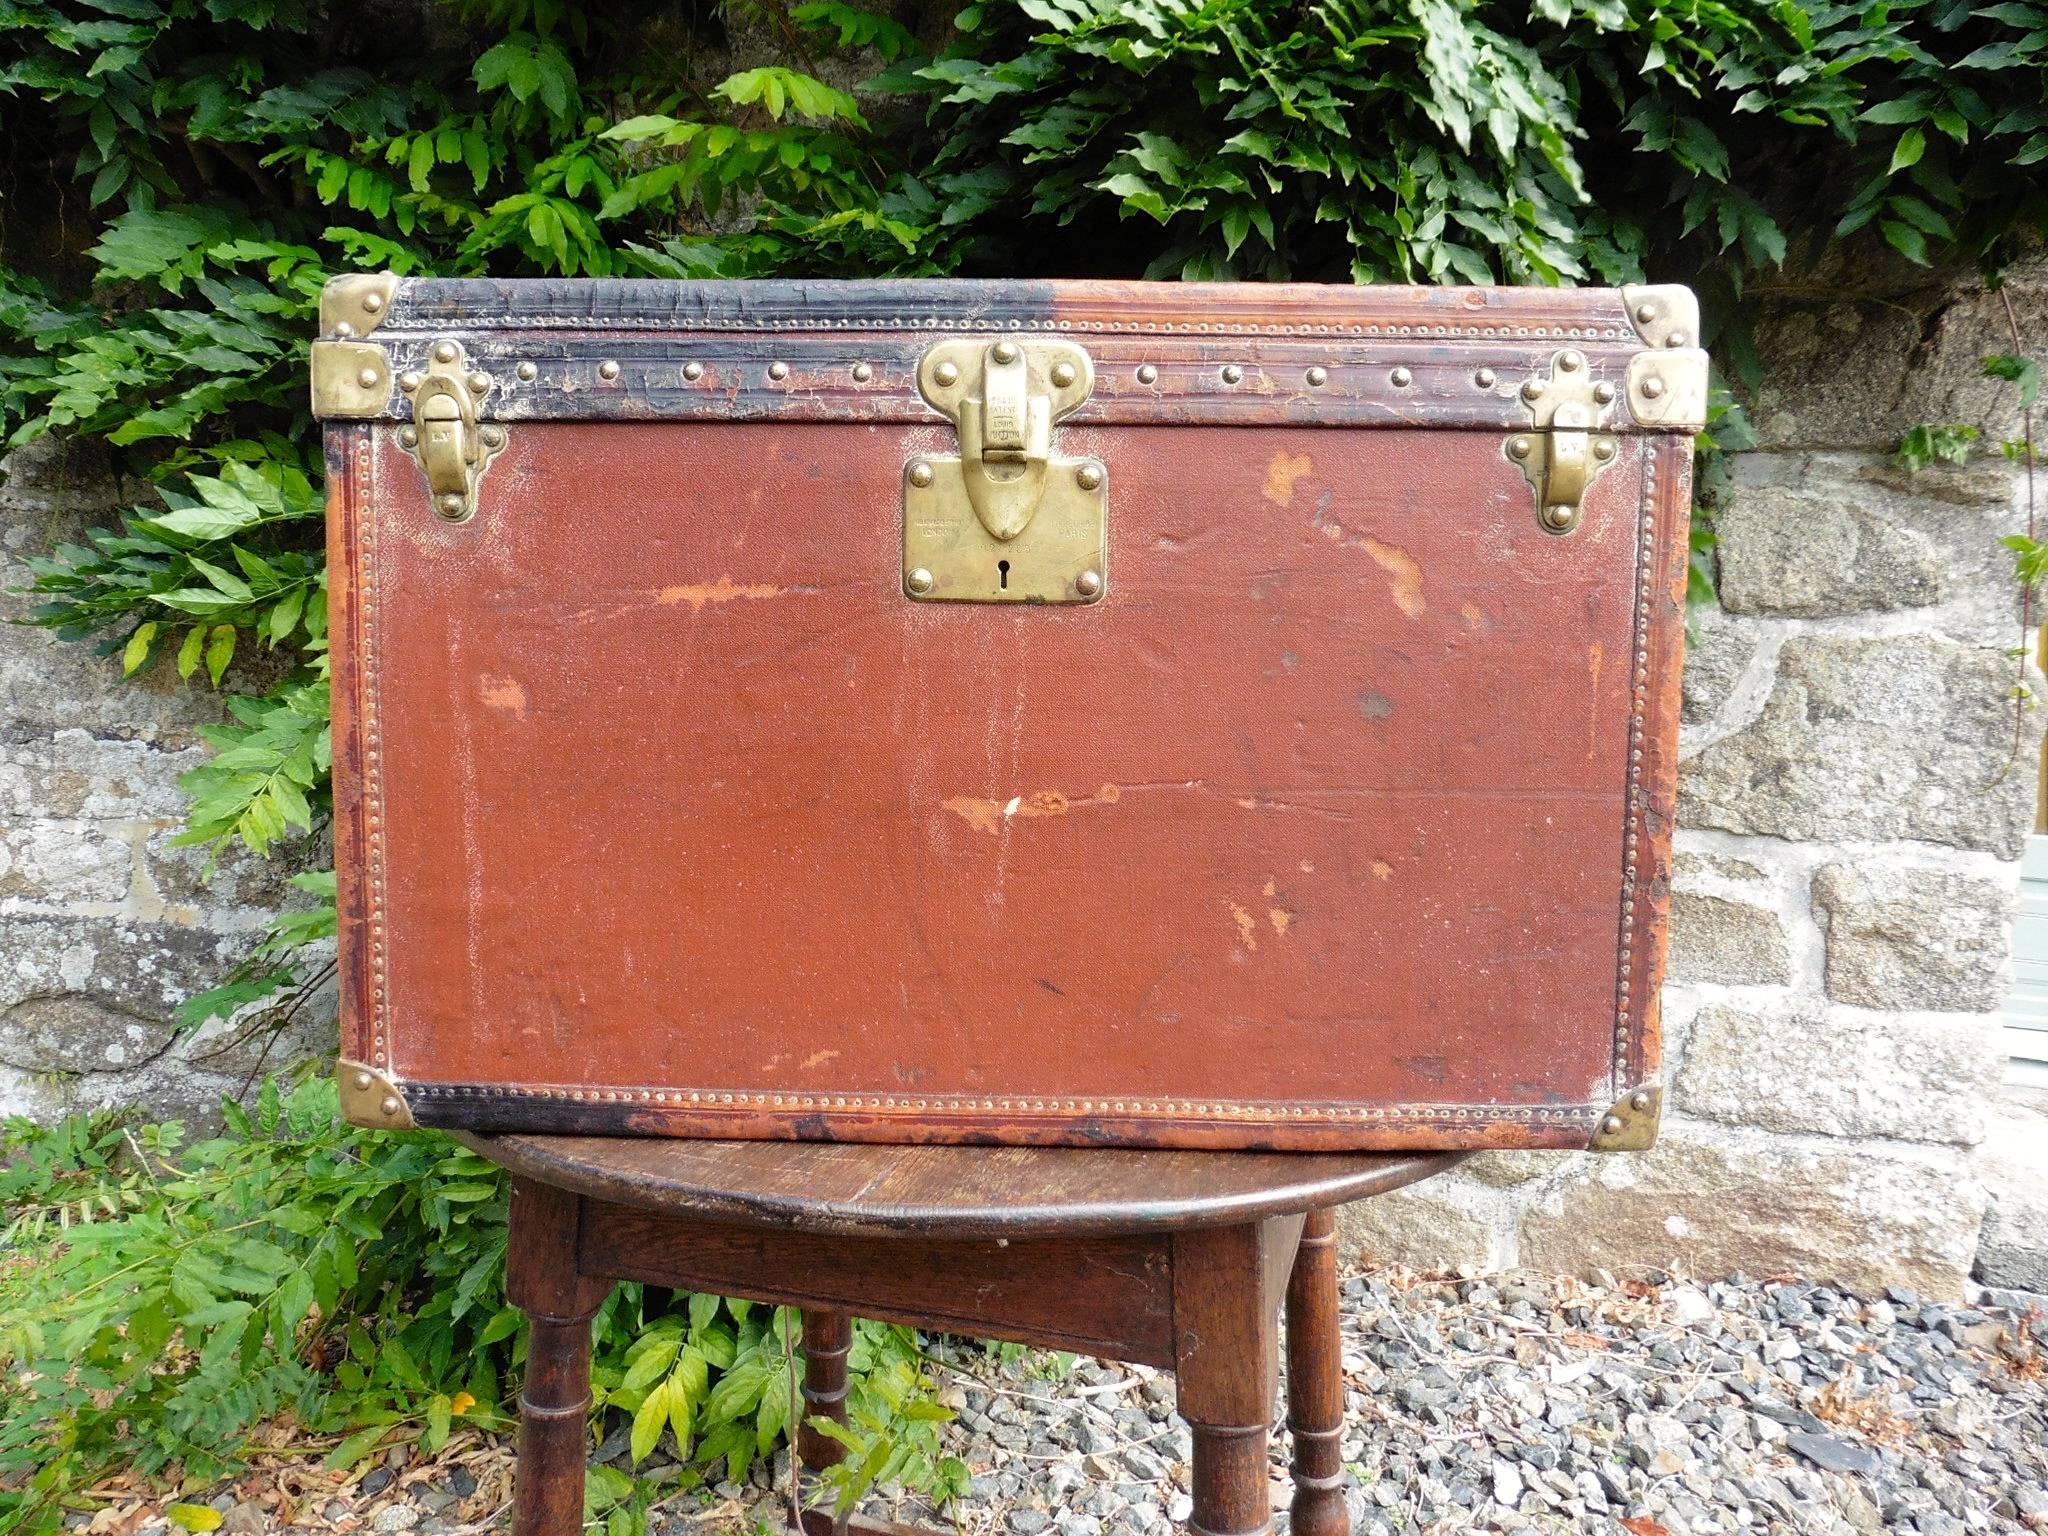 These two very rare suitcases date from 1900 and the very early 20th century

The steamer trunk is made in original orange canvas, leather and brass, the condition is used, there is a piece of one of the brass catches missing, and the quilted